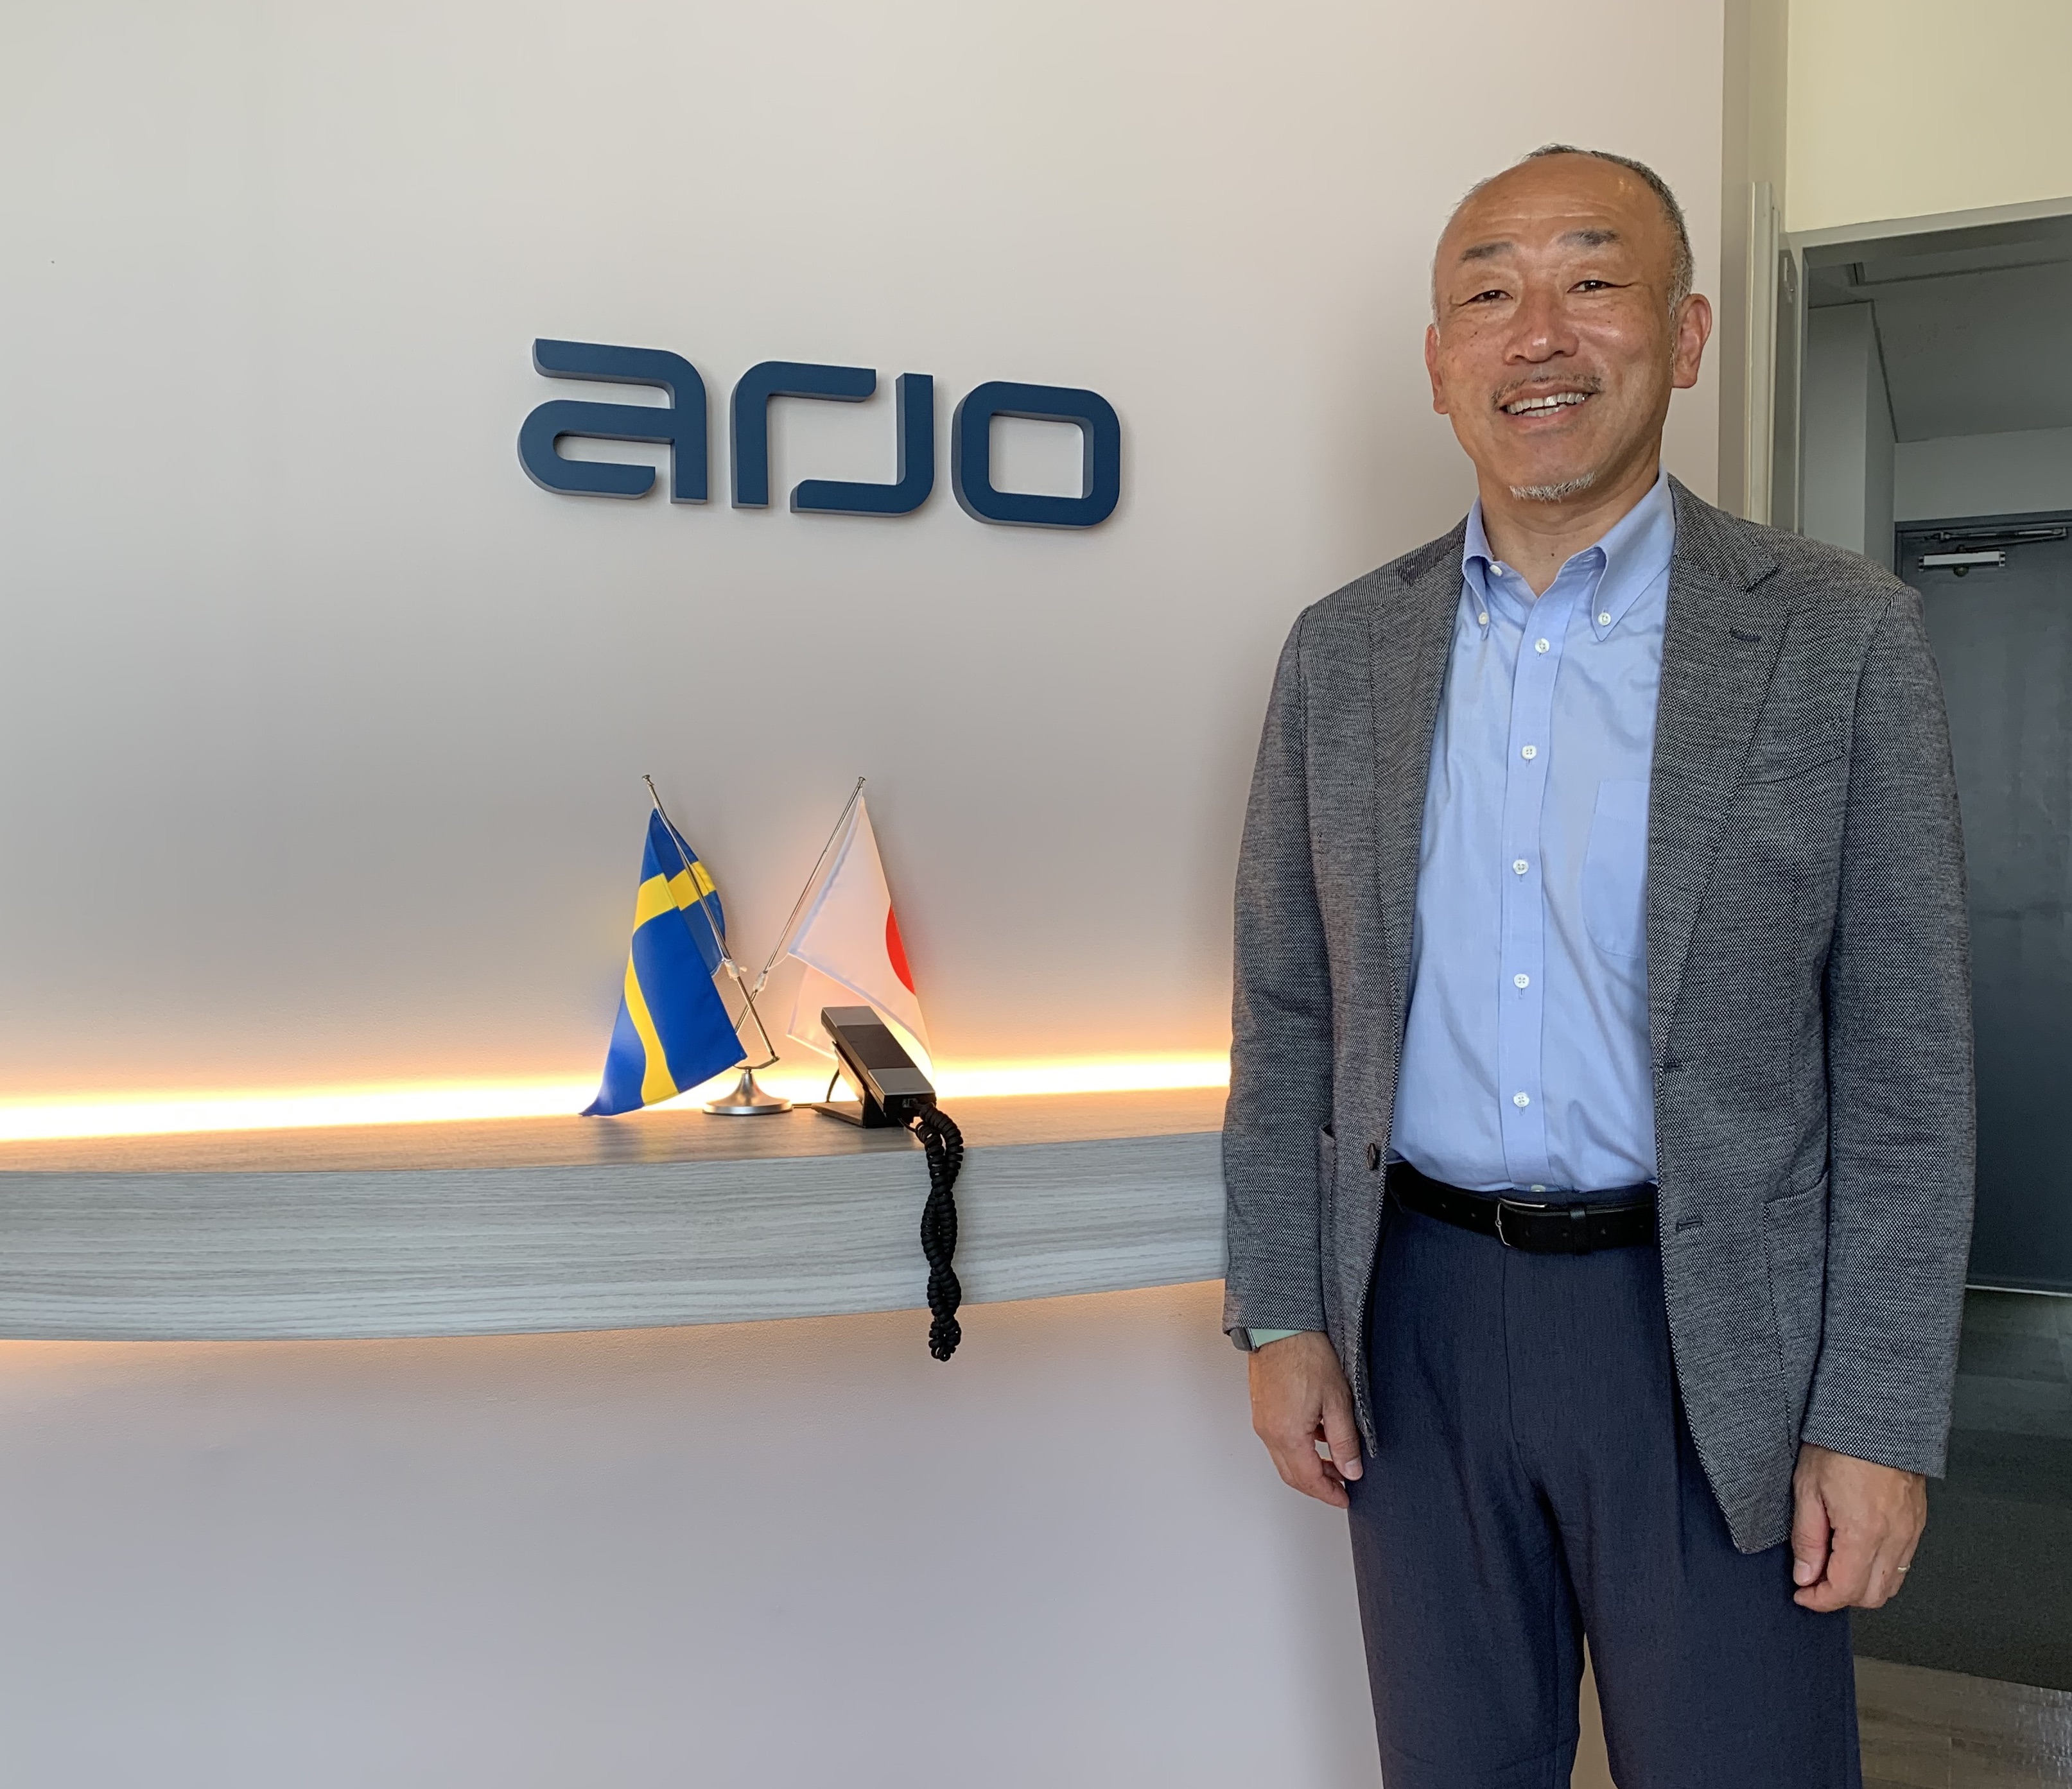 Member Introduction: Arjo ~ Empowering Movement